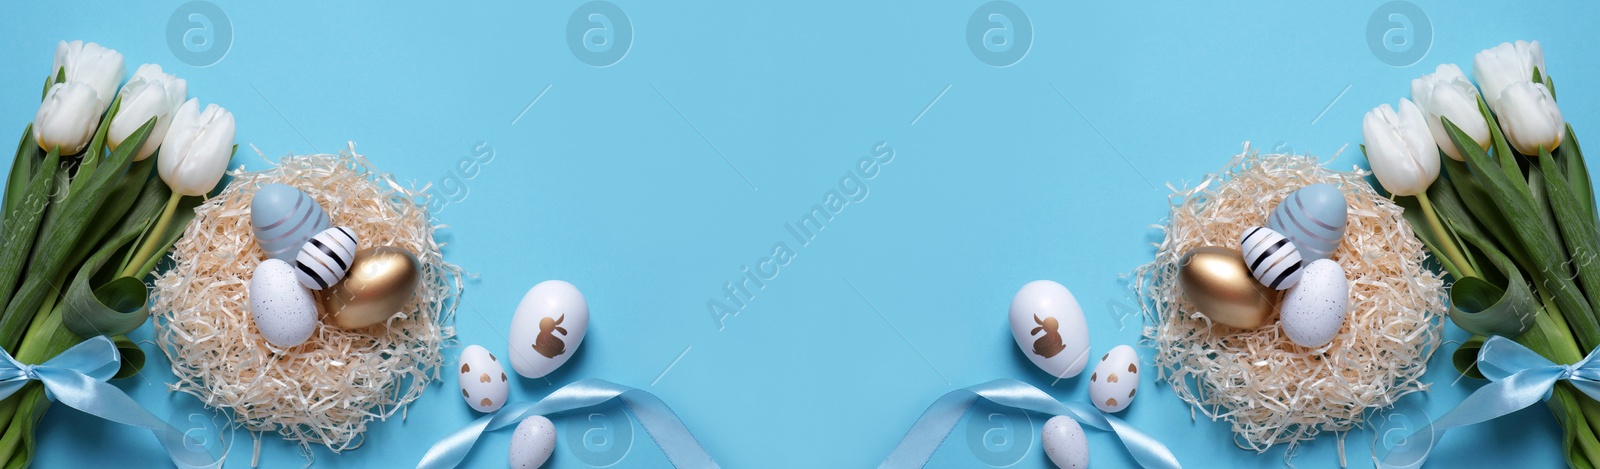 Image of Flat lay composition with decorated Easter eggs and flowers on light blue background, space for text. Banner design